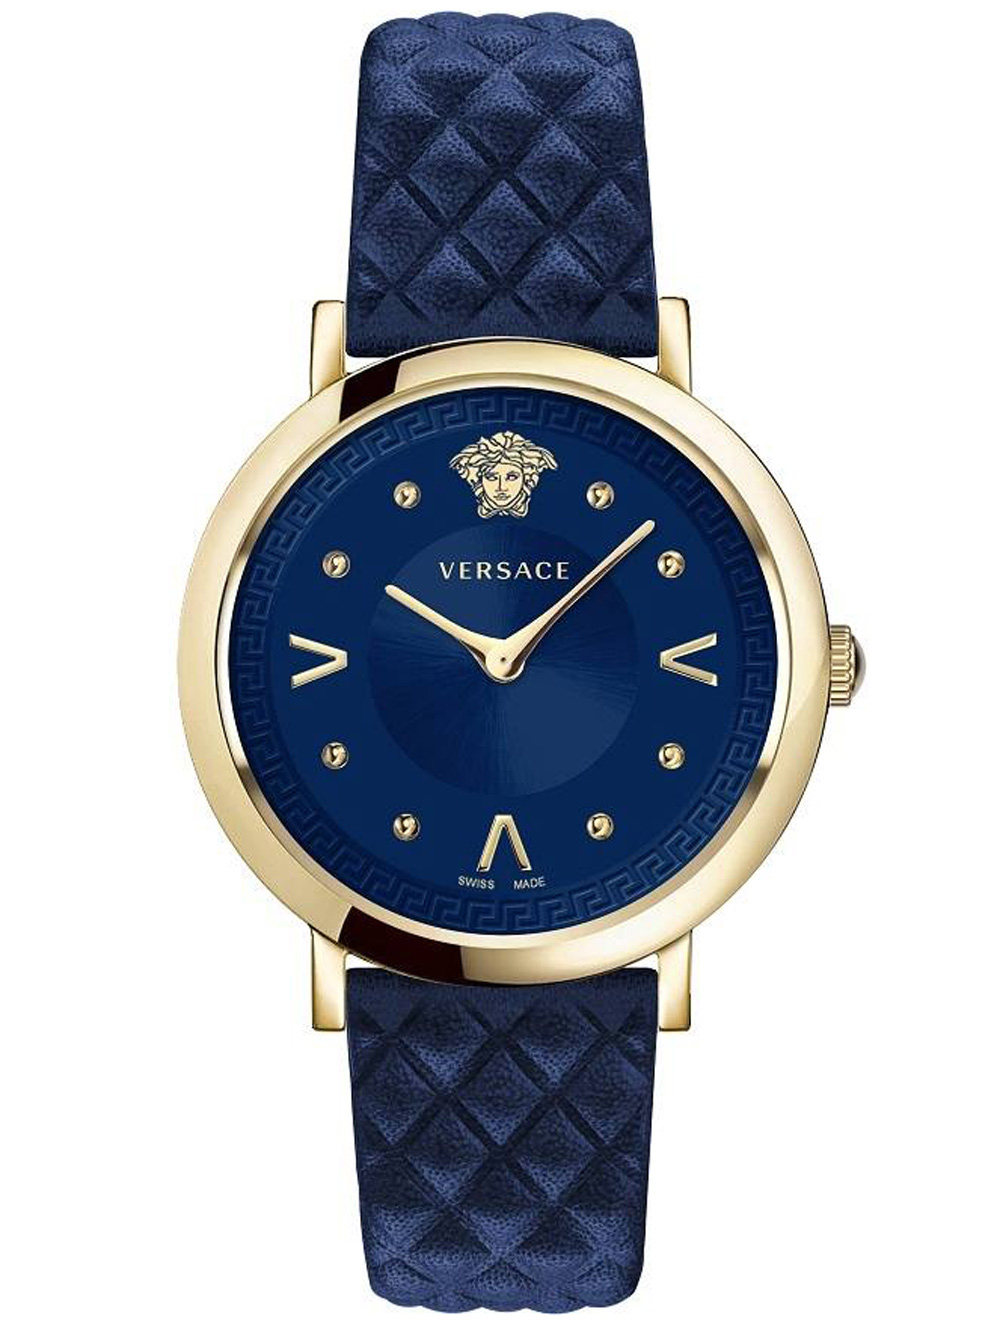 Versace VEVD00319 Pop Chic Ladies Watch 36mm 5ATM BY Versace - Wristwatch available at DOYUF